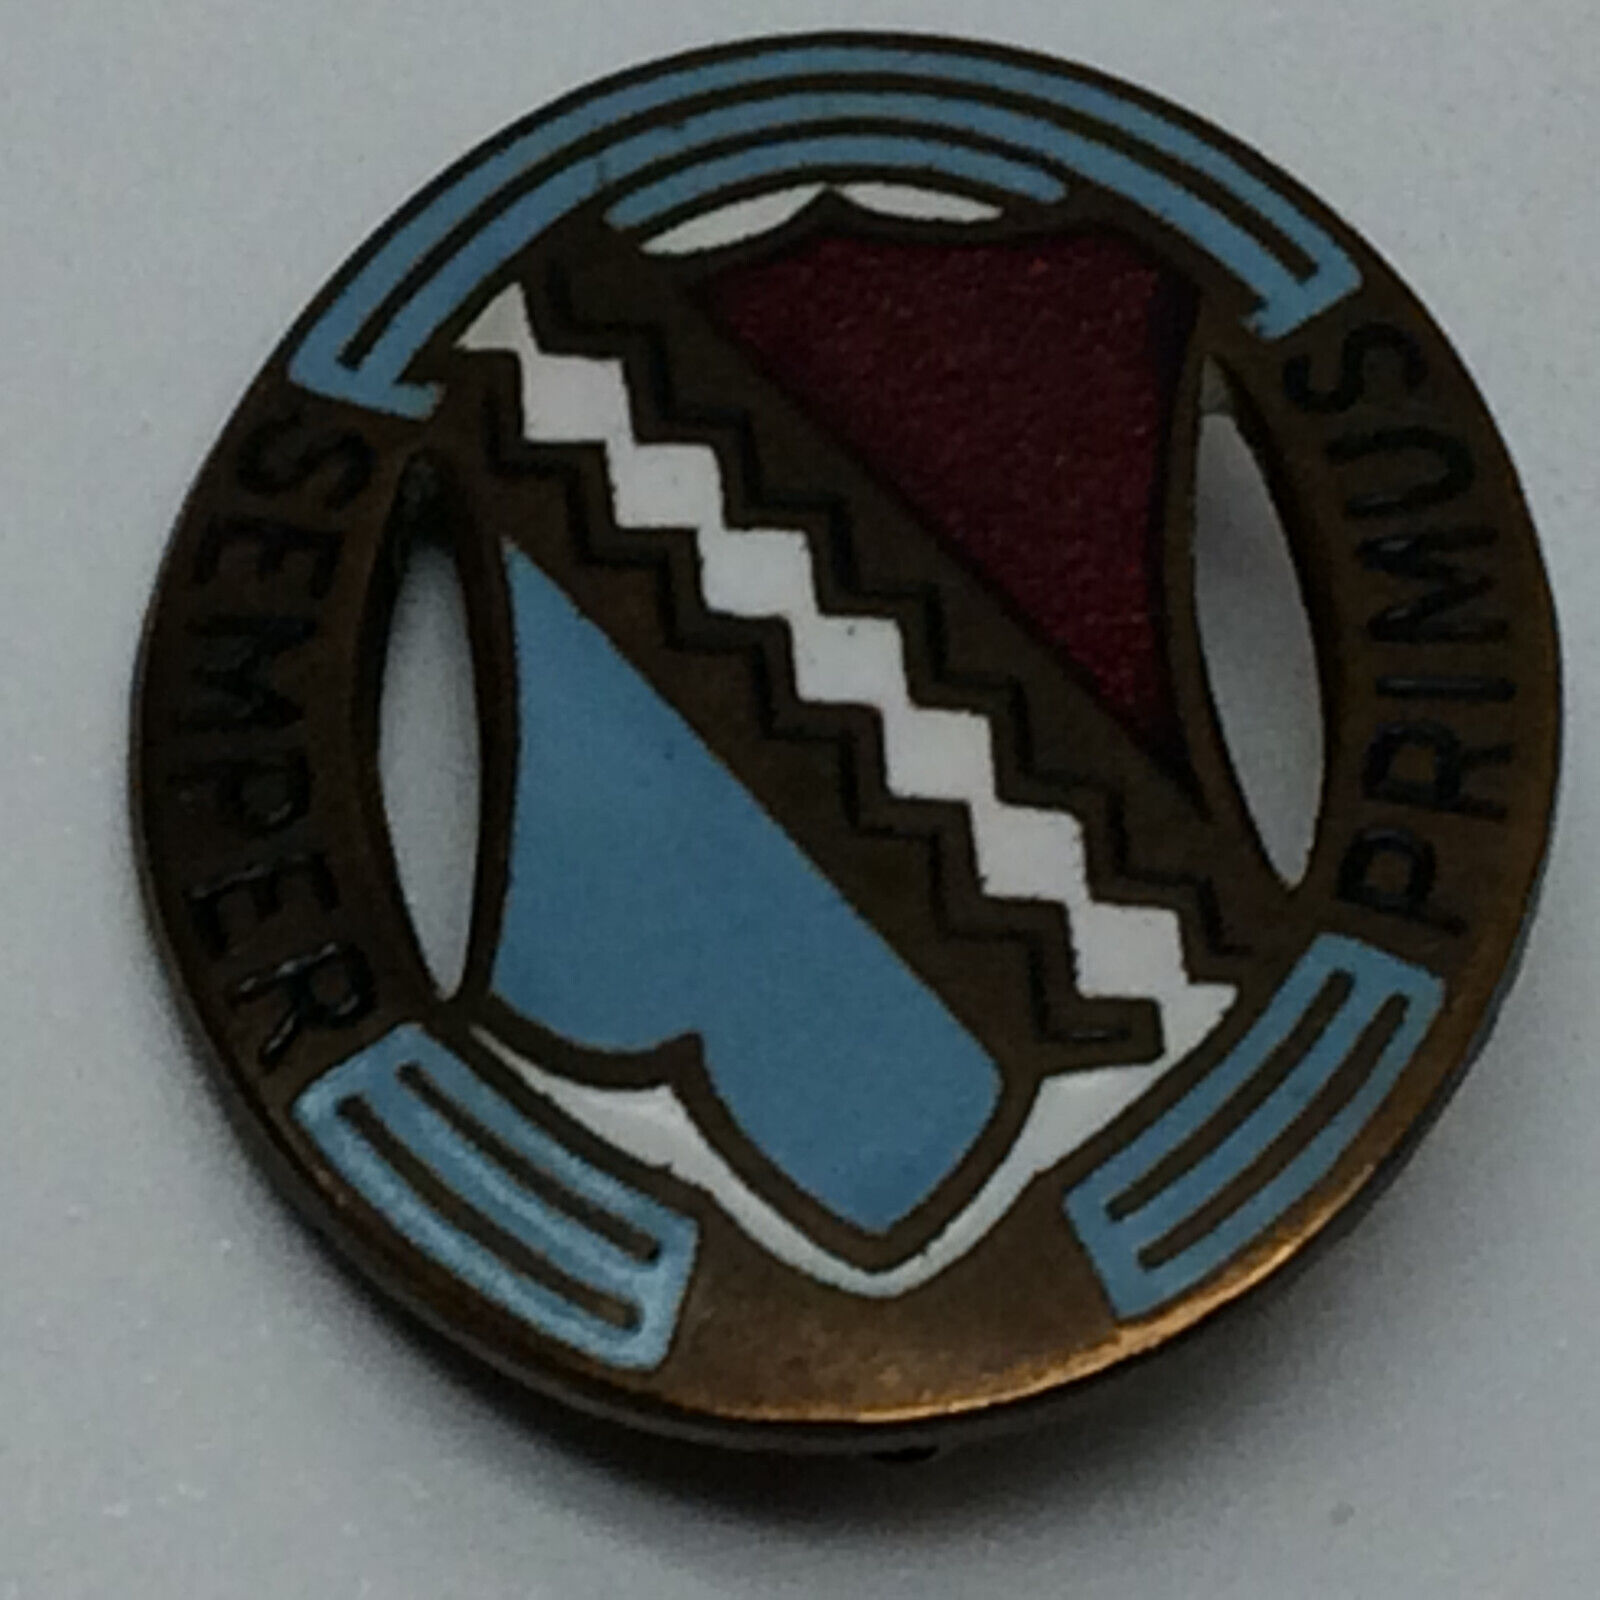 Vintage Military U.S. Army First Infantry Regiment Enamel Pin 1st